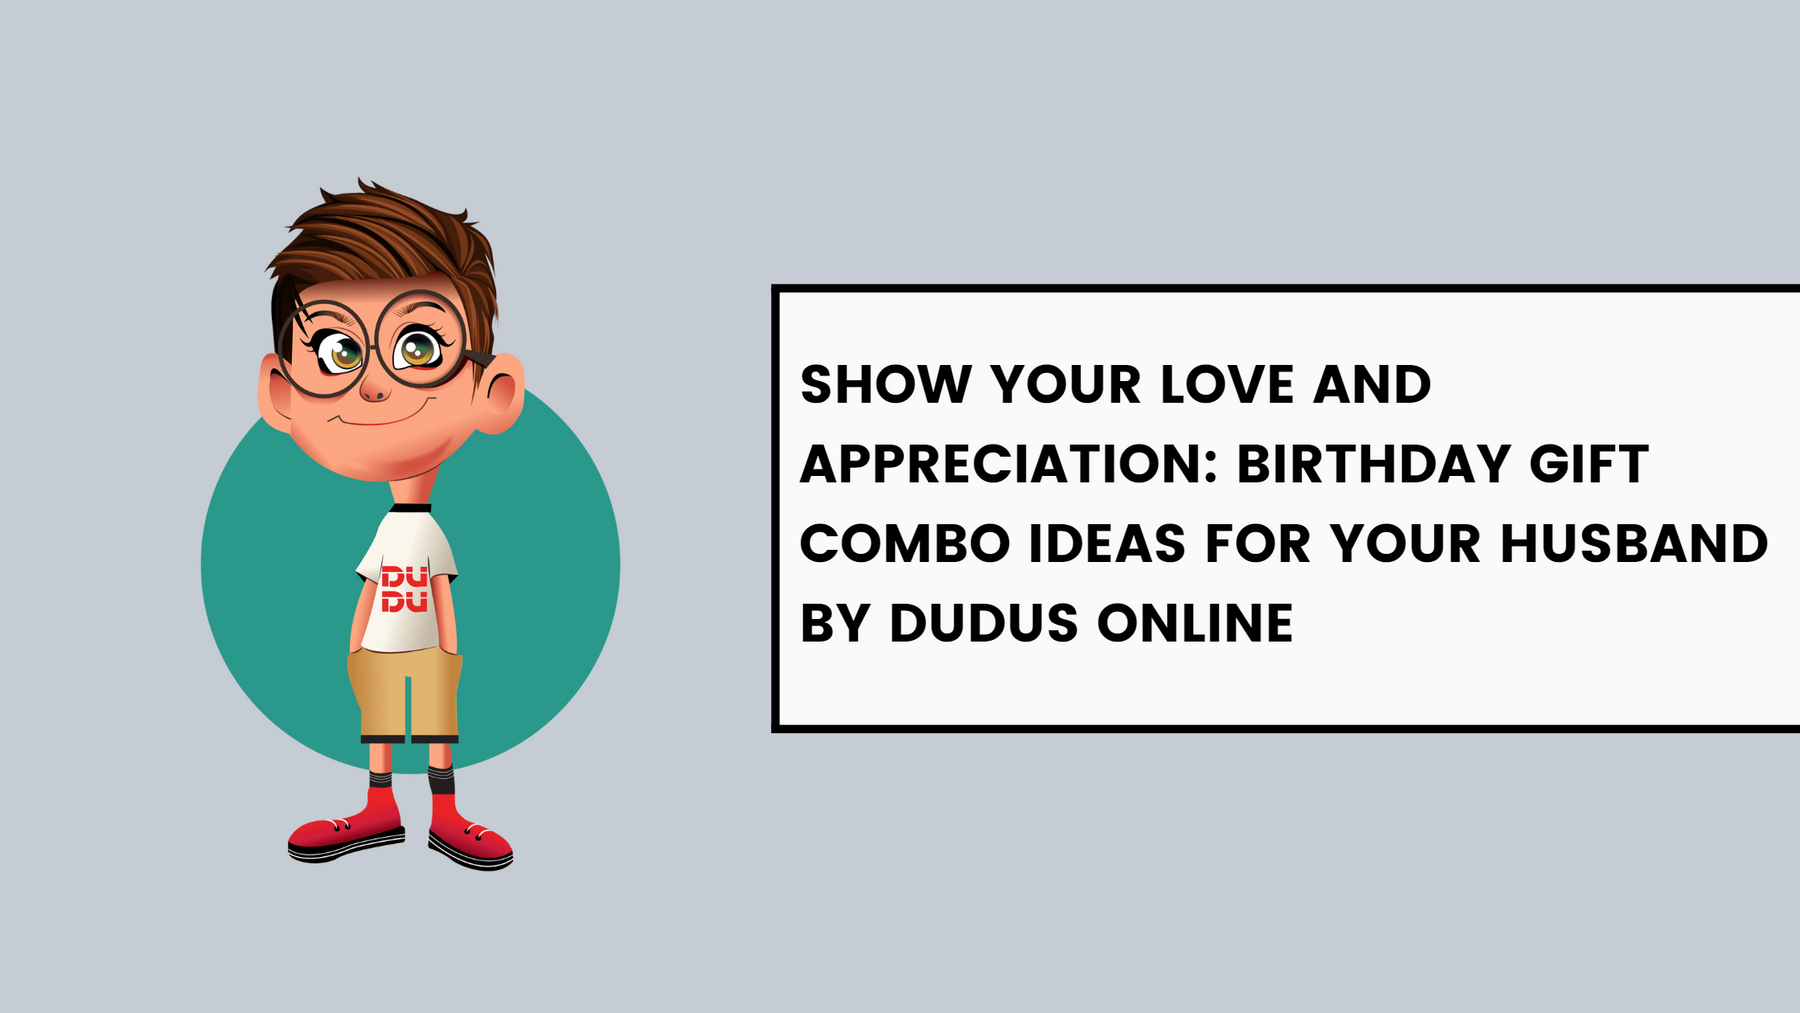 Show Your Love And Appreciation: Birthday Gift Combo Ideas For Your Husband By Dudus Online